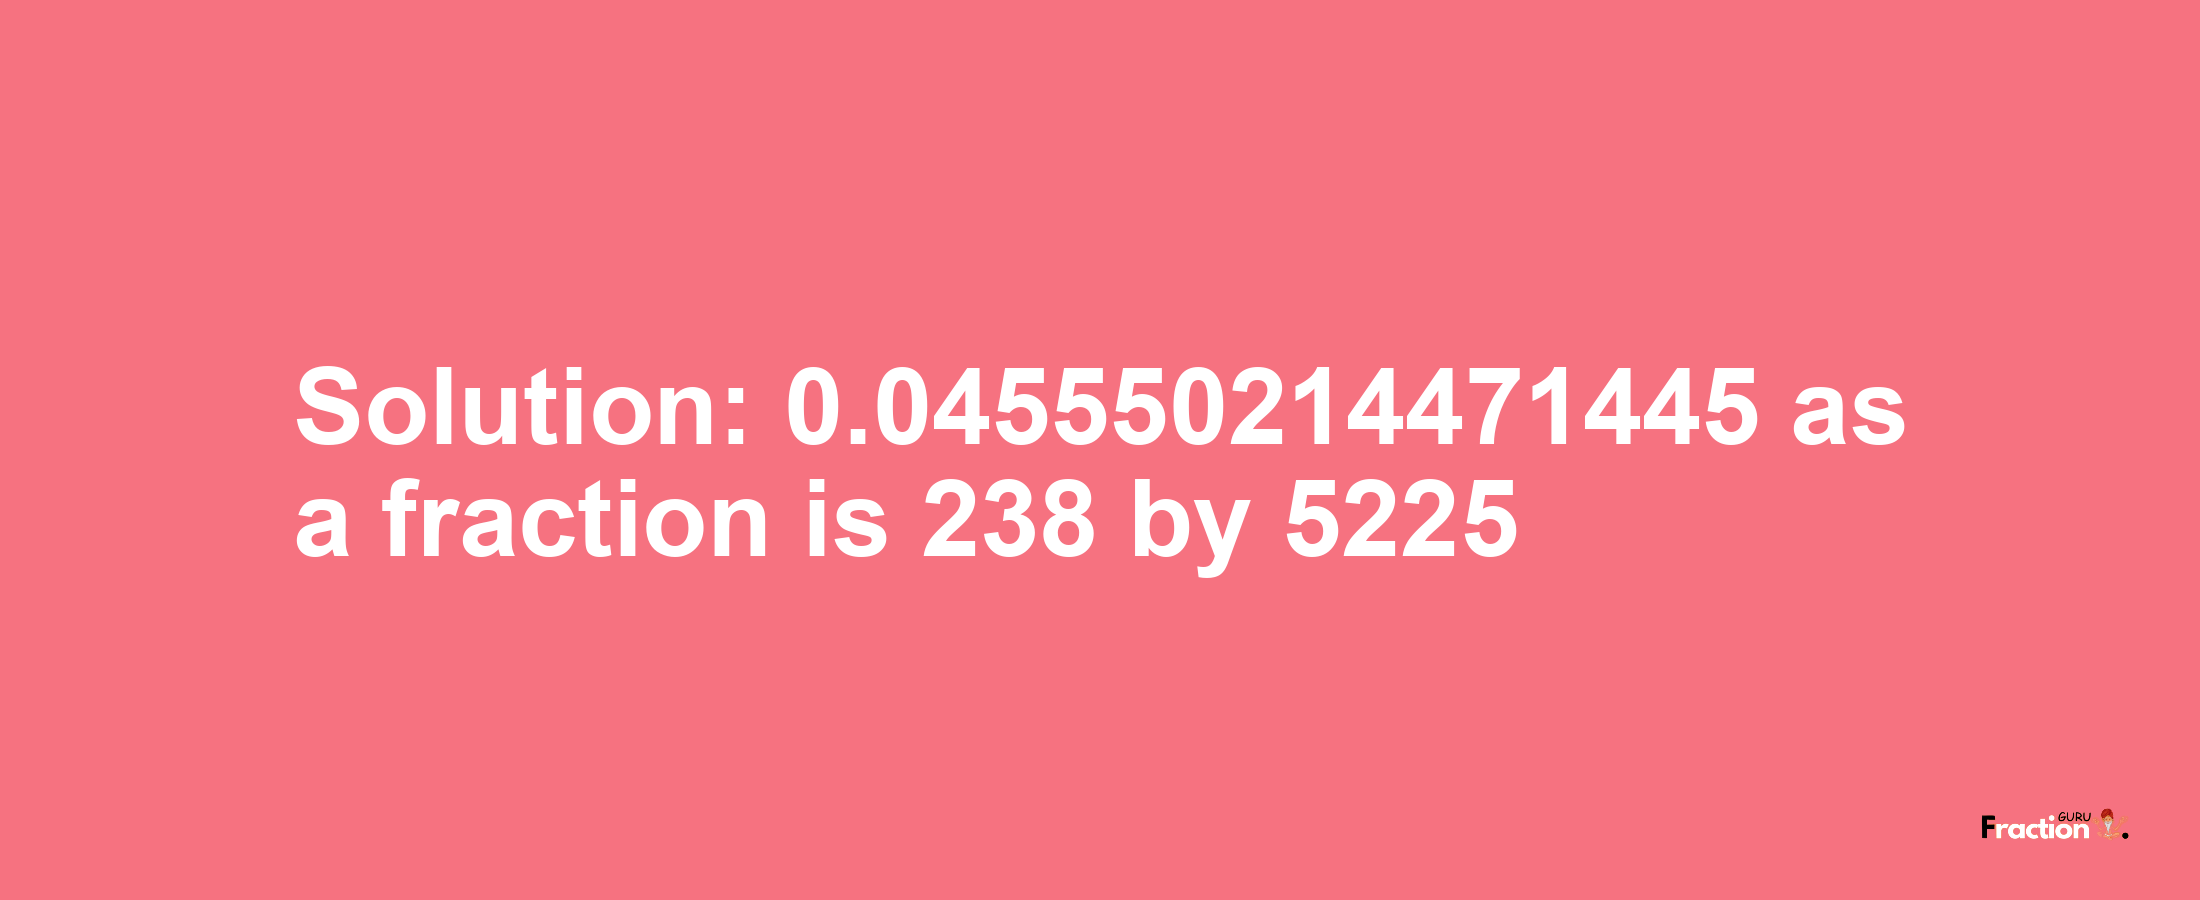 Solution:0.045550214471445 as a fraction is 238/5225